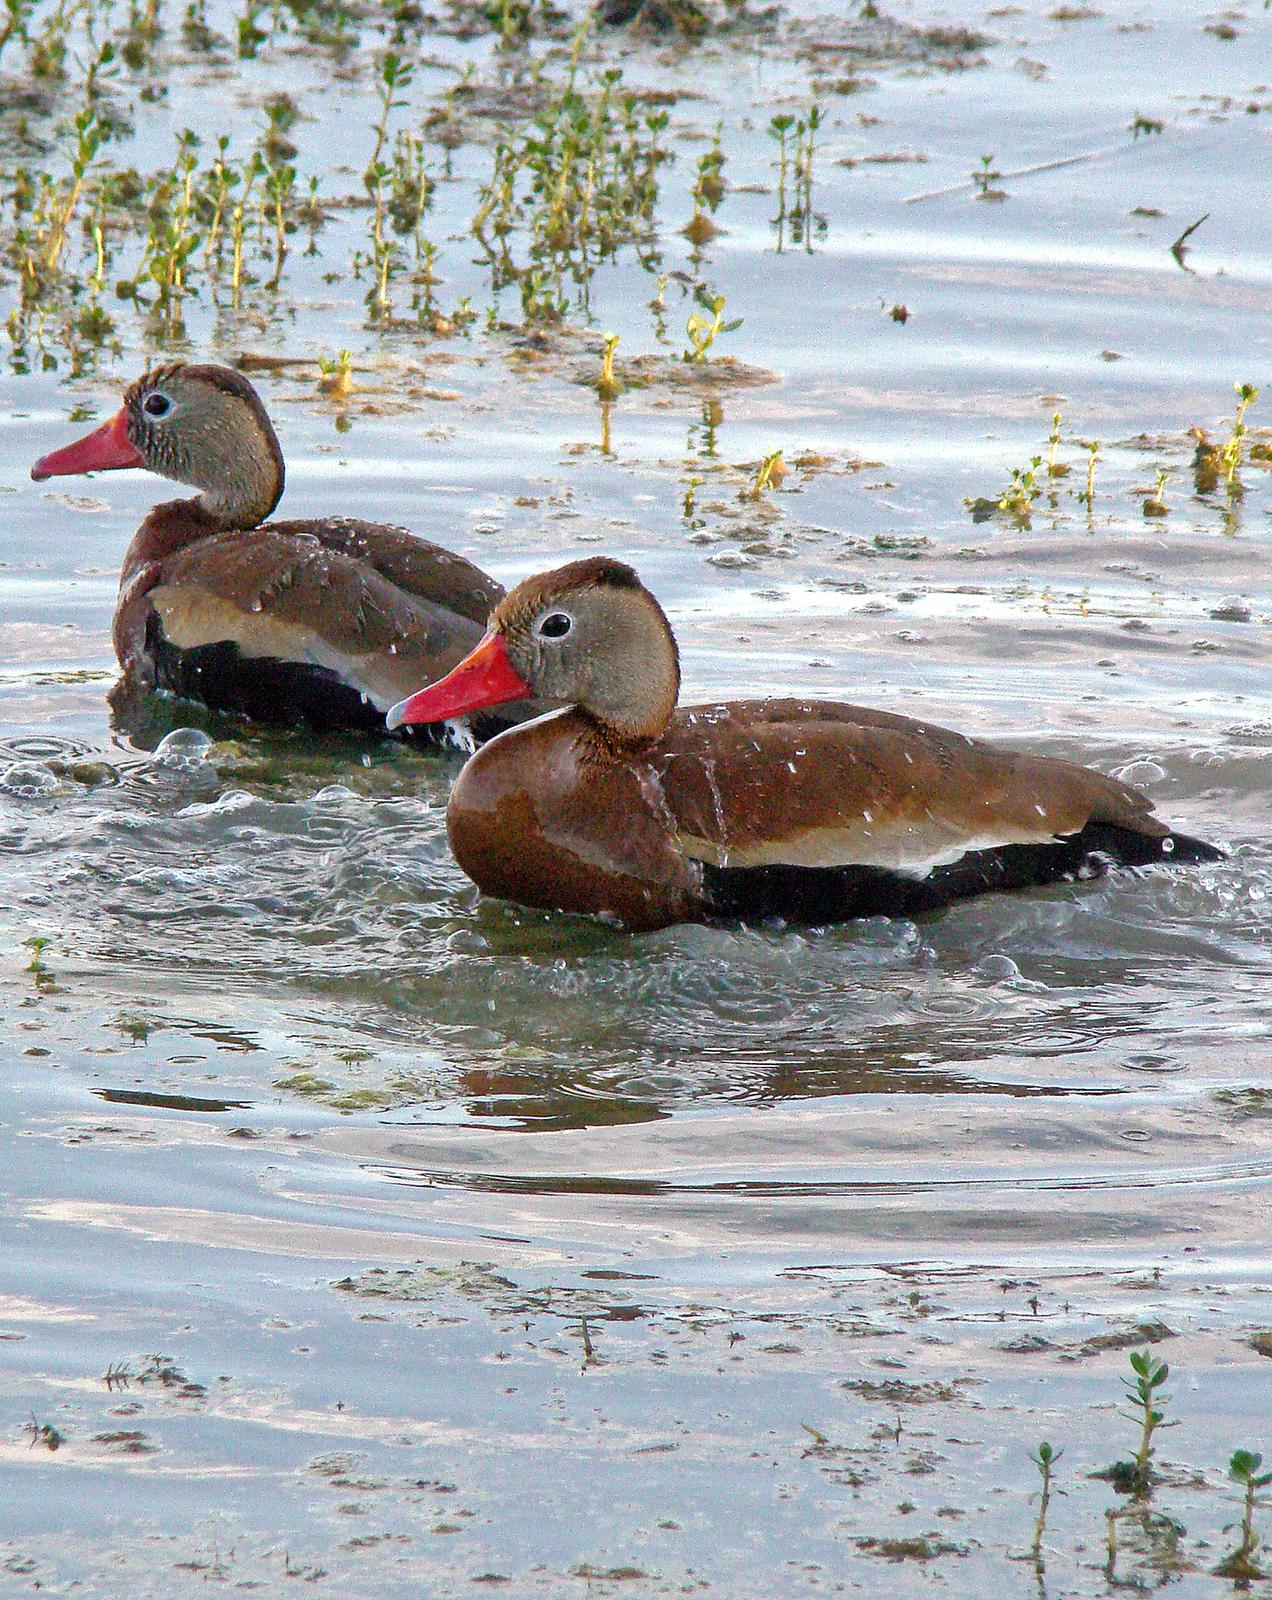 Black-bellied Whistling-Duck Photo by Robert Behrstock